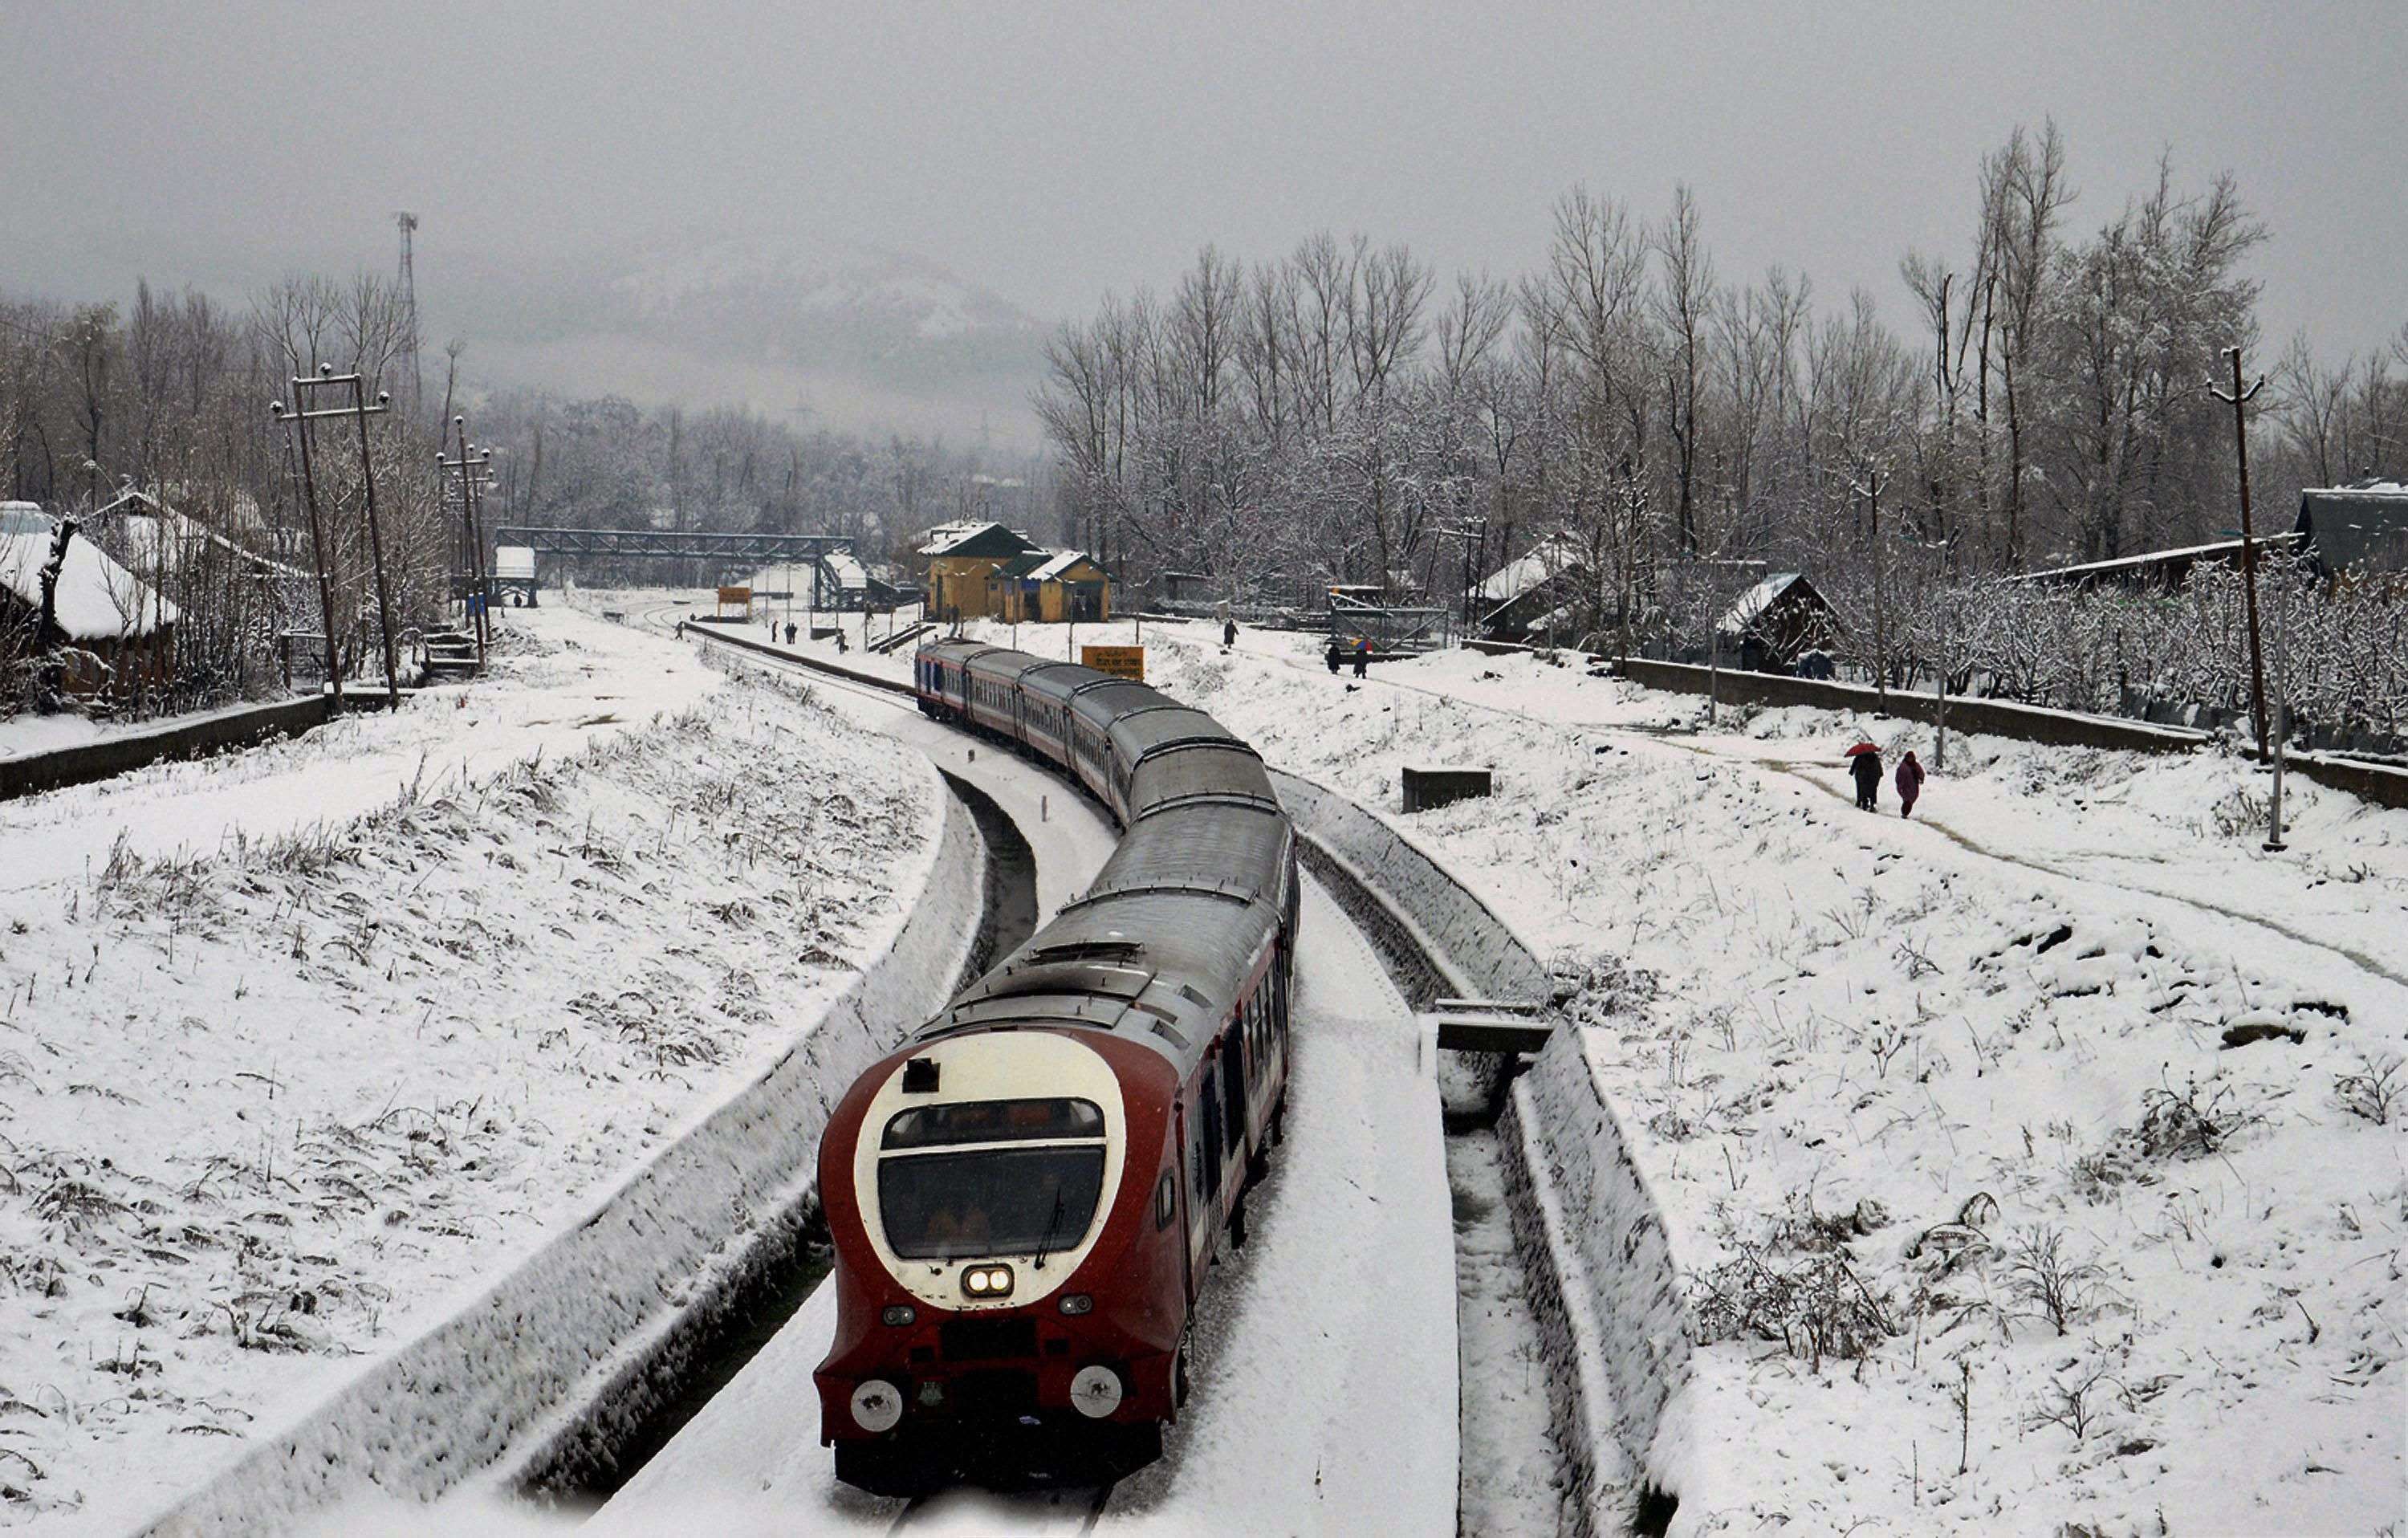 Anantnag: A train moves on snow covered railway tracks after season's first snowfall, in Anantnag district of south Kashmir. (Photo courtesy: PTI)